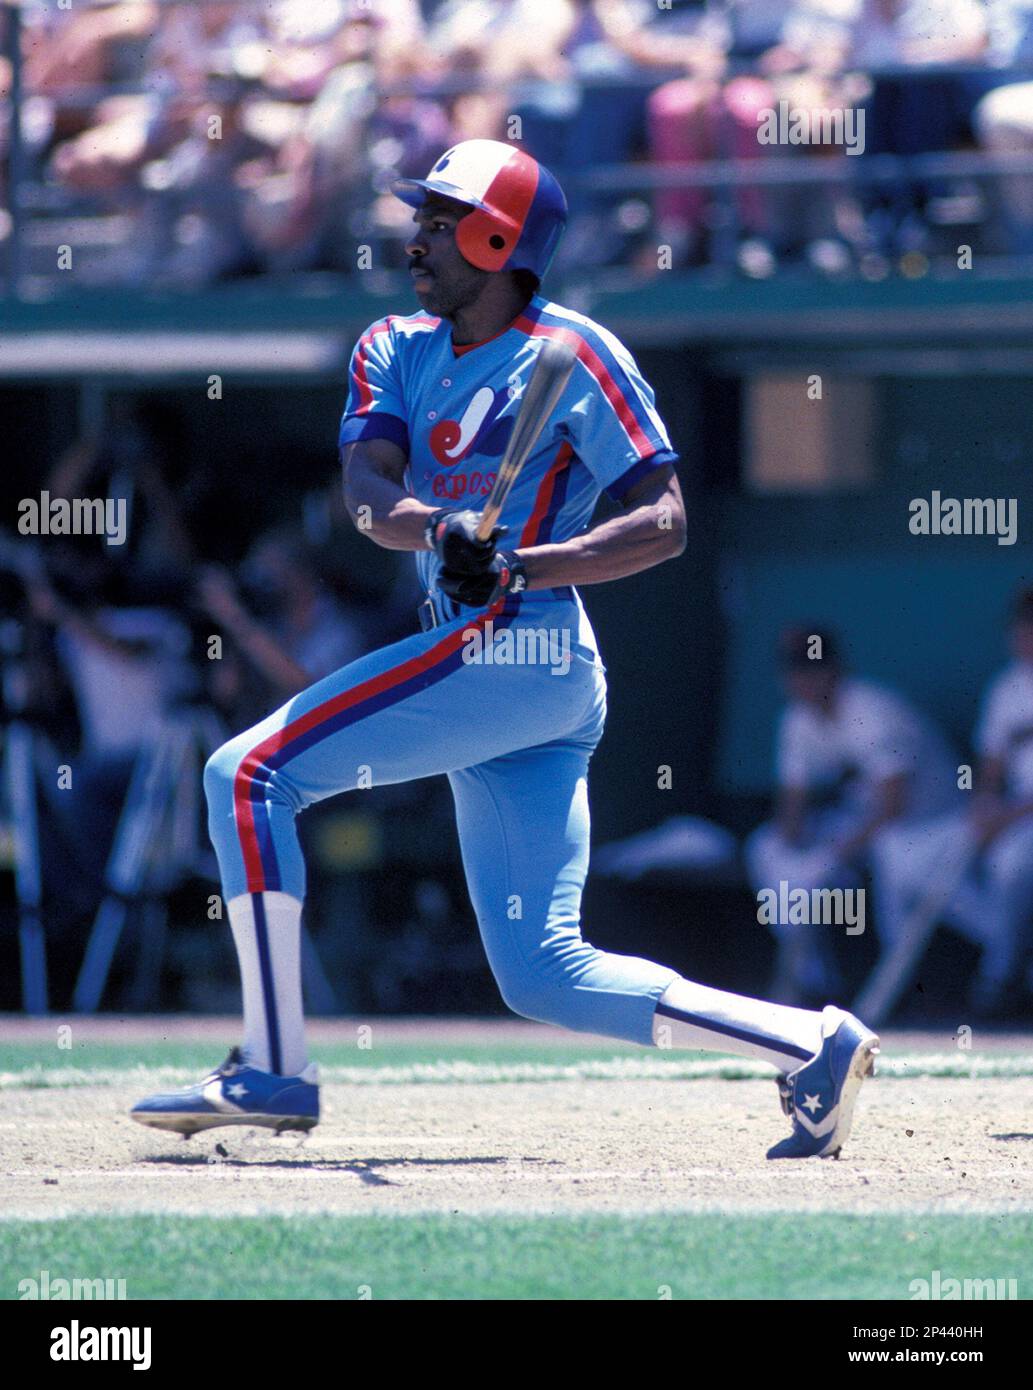 Expos-ed: Andre Dawson and the 25 Greatest Montreal Expos